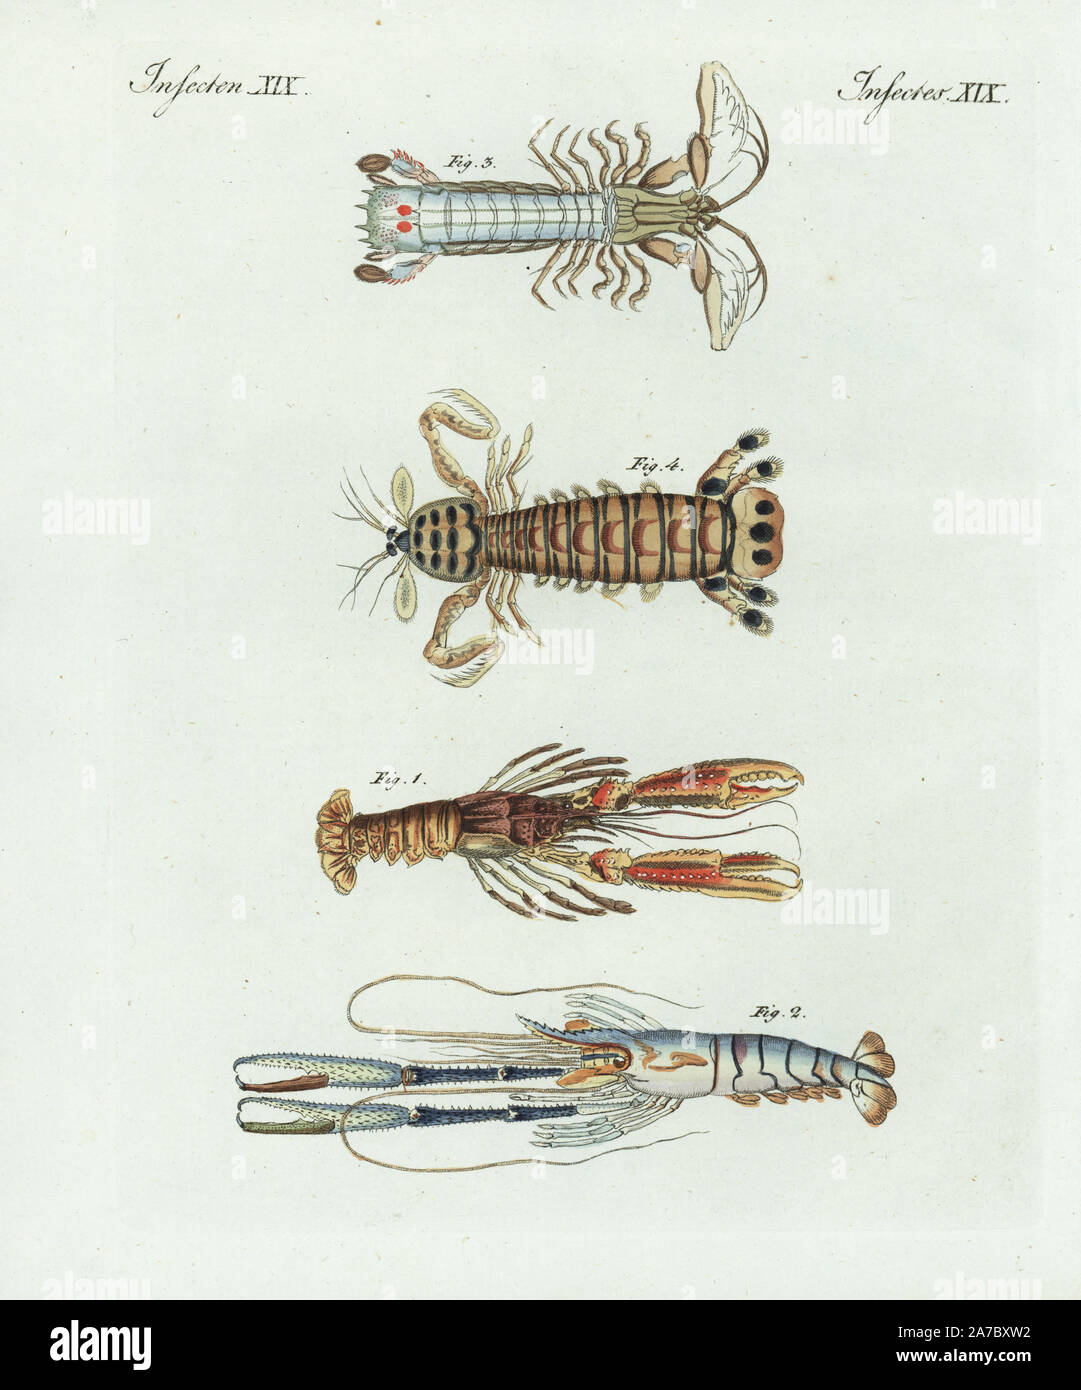 Scampi, Nephrops norvegicus 1, shrimp, Macrobrachium carcinus 2, crayfish species 3, and mantis shrimp, Squilla mantis 4. Handcoloured copperplate engraving from Bertuch's 'Bilderbuch fur Kinder' (Picture Book for Children), Weimar, 1798. Friedrich Johann Bertuch (1747-1822) was a German publisher and man of arts most famous for his 12-volume encyclopedia for children illustrated with 1,200 engraved plates on natural history, science, costume, mythology, etc., published from 1790-1830. Stock Photo